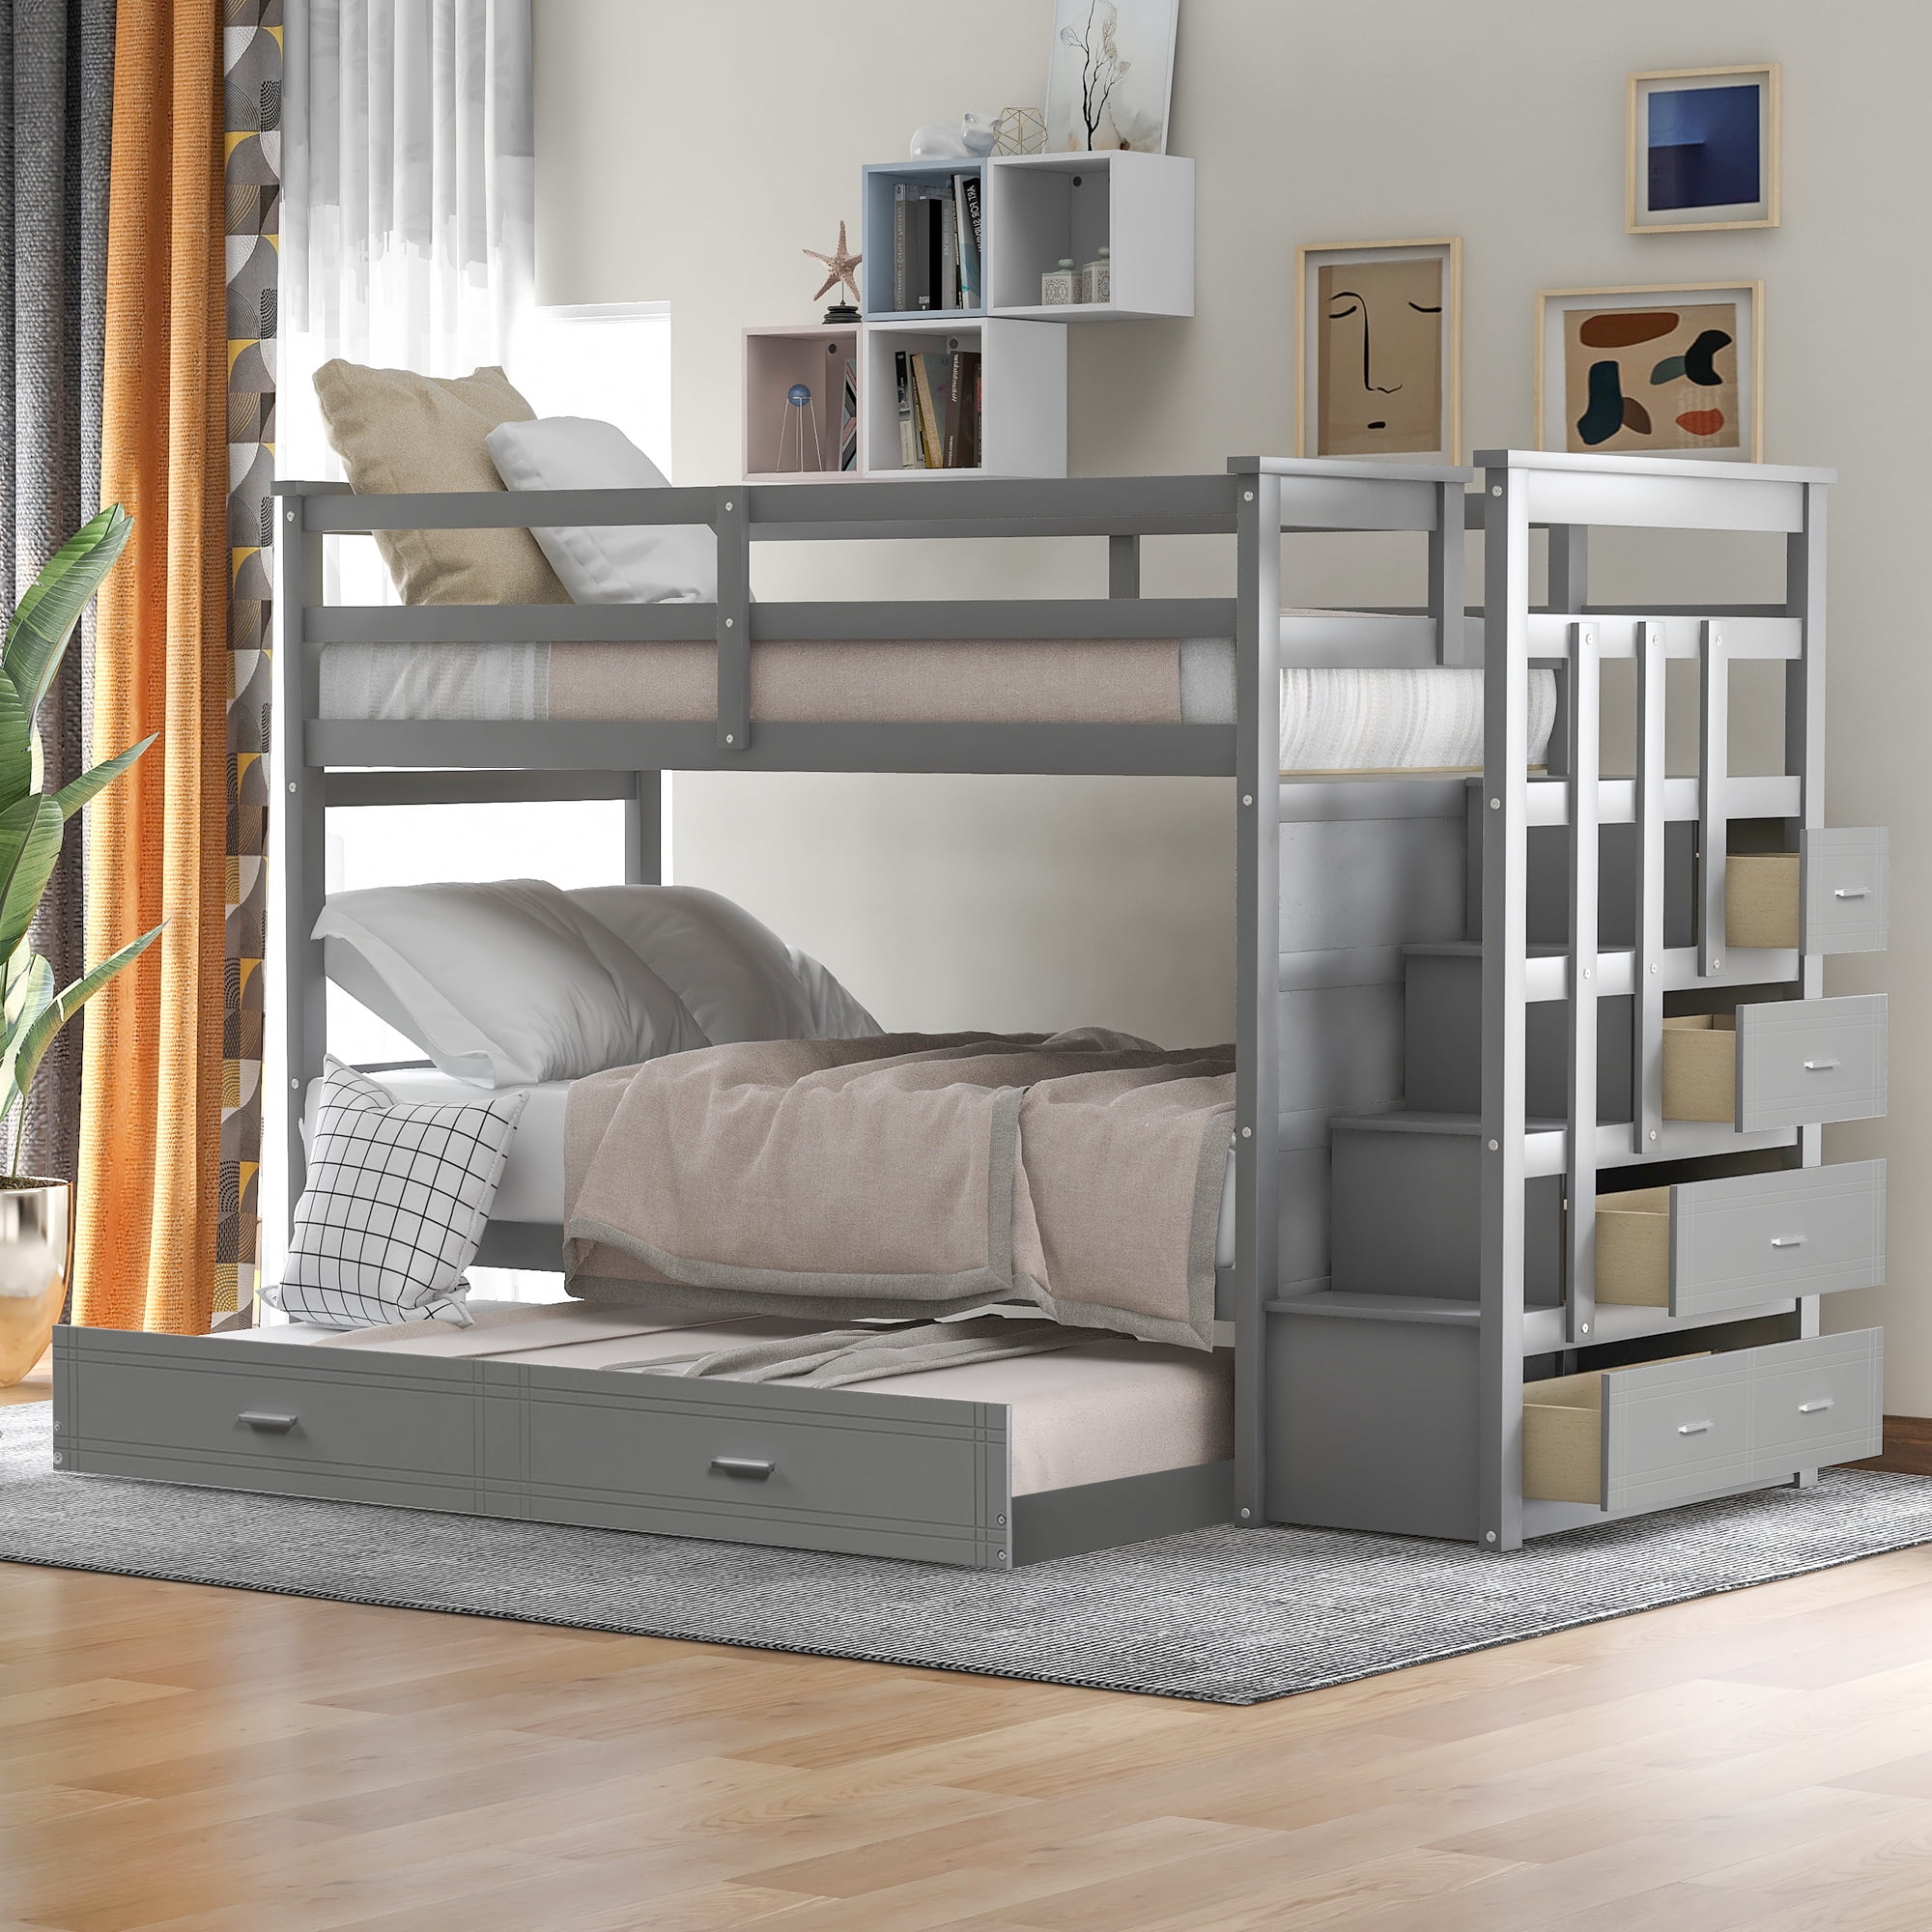 Trundle Frame Sets Premium Firm, Daybed Bunk Bed